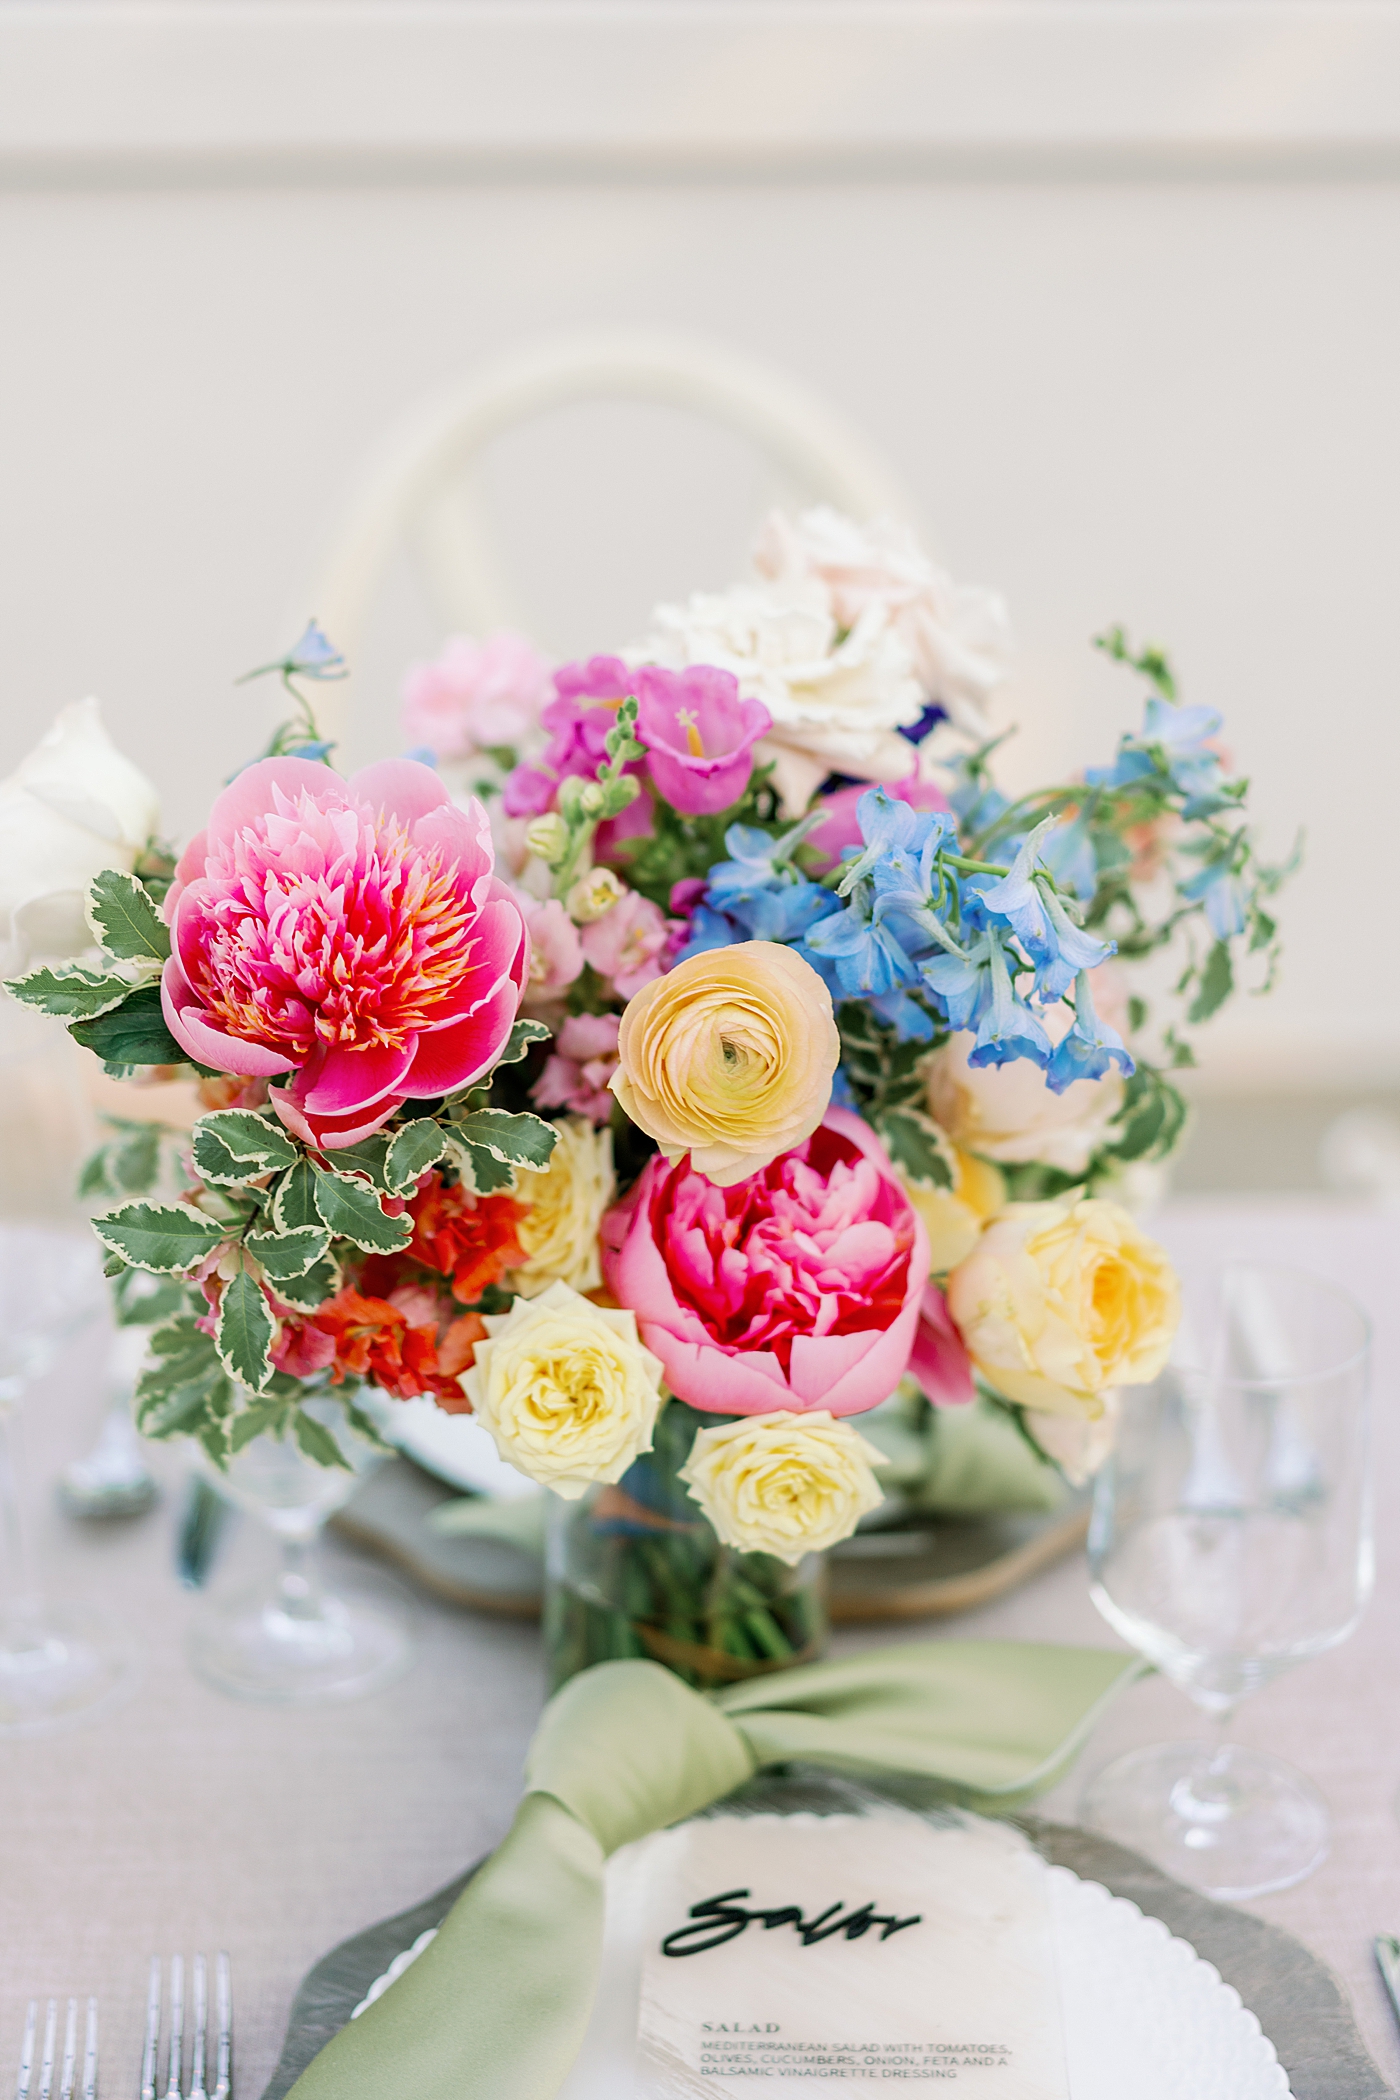 Table setting during summer inspired garden wedding with bright florals | Photo by Annie Laura Photo